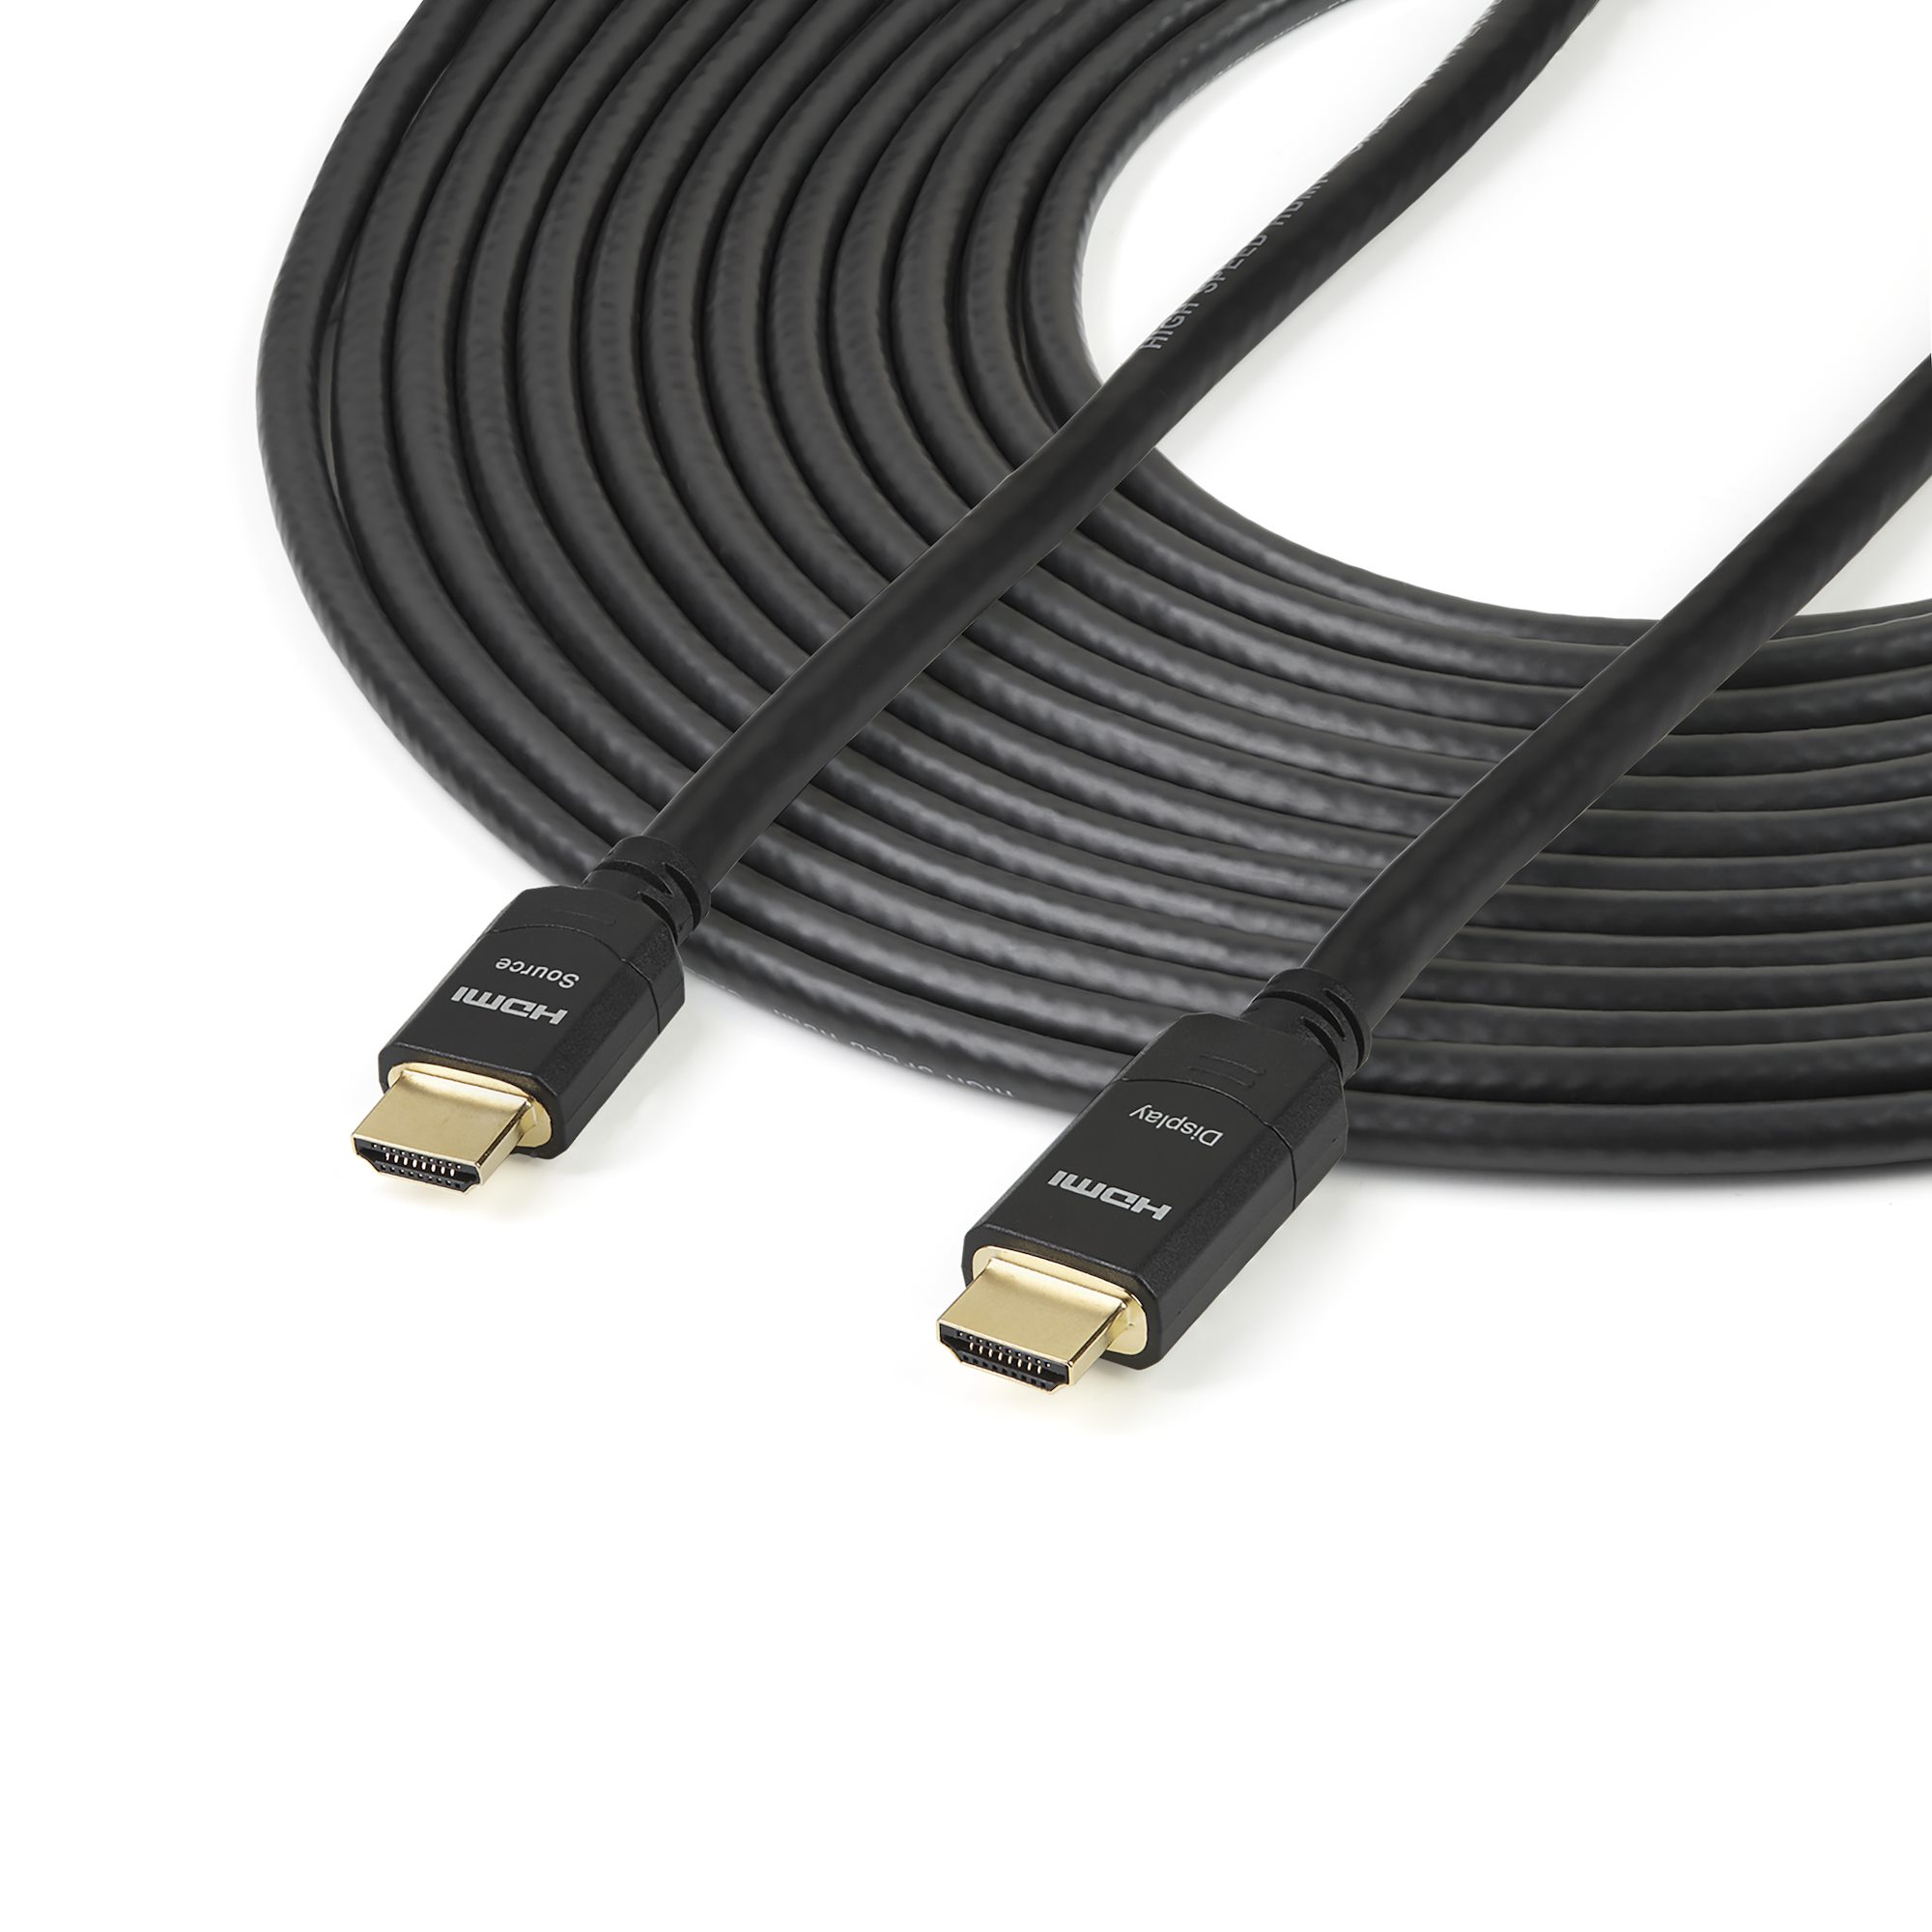 High Speed HDMI Cable M/M - Active - CL2 In-Wall - 20 m (65 ft.)